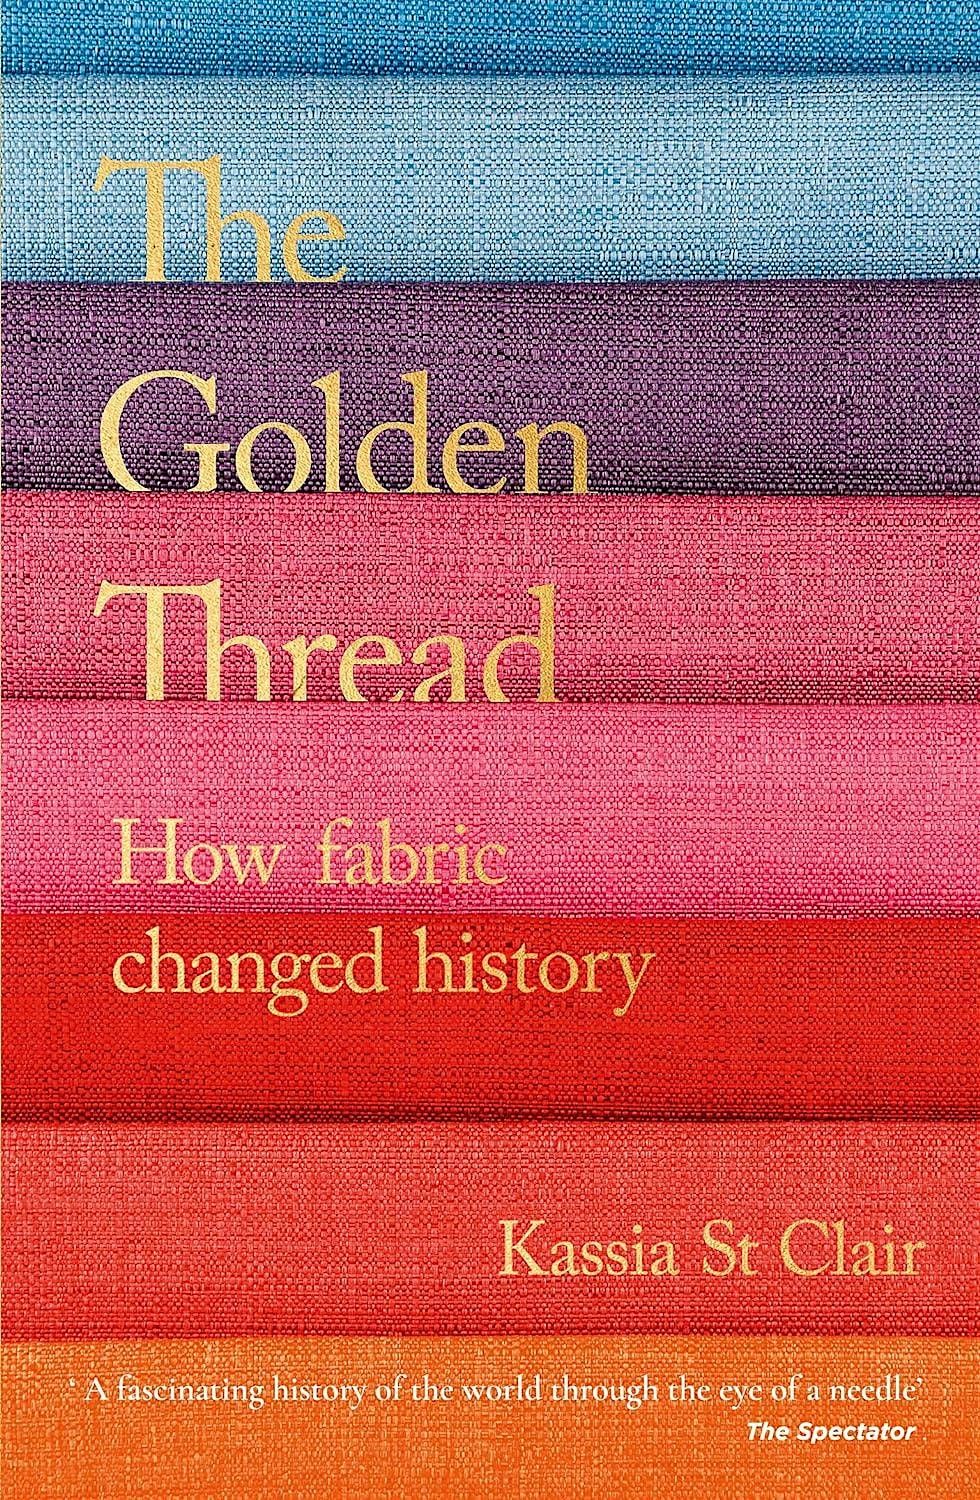 The Golden Thread: How Fabric Changed History with Kassia St Clair